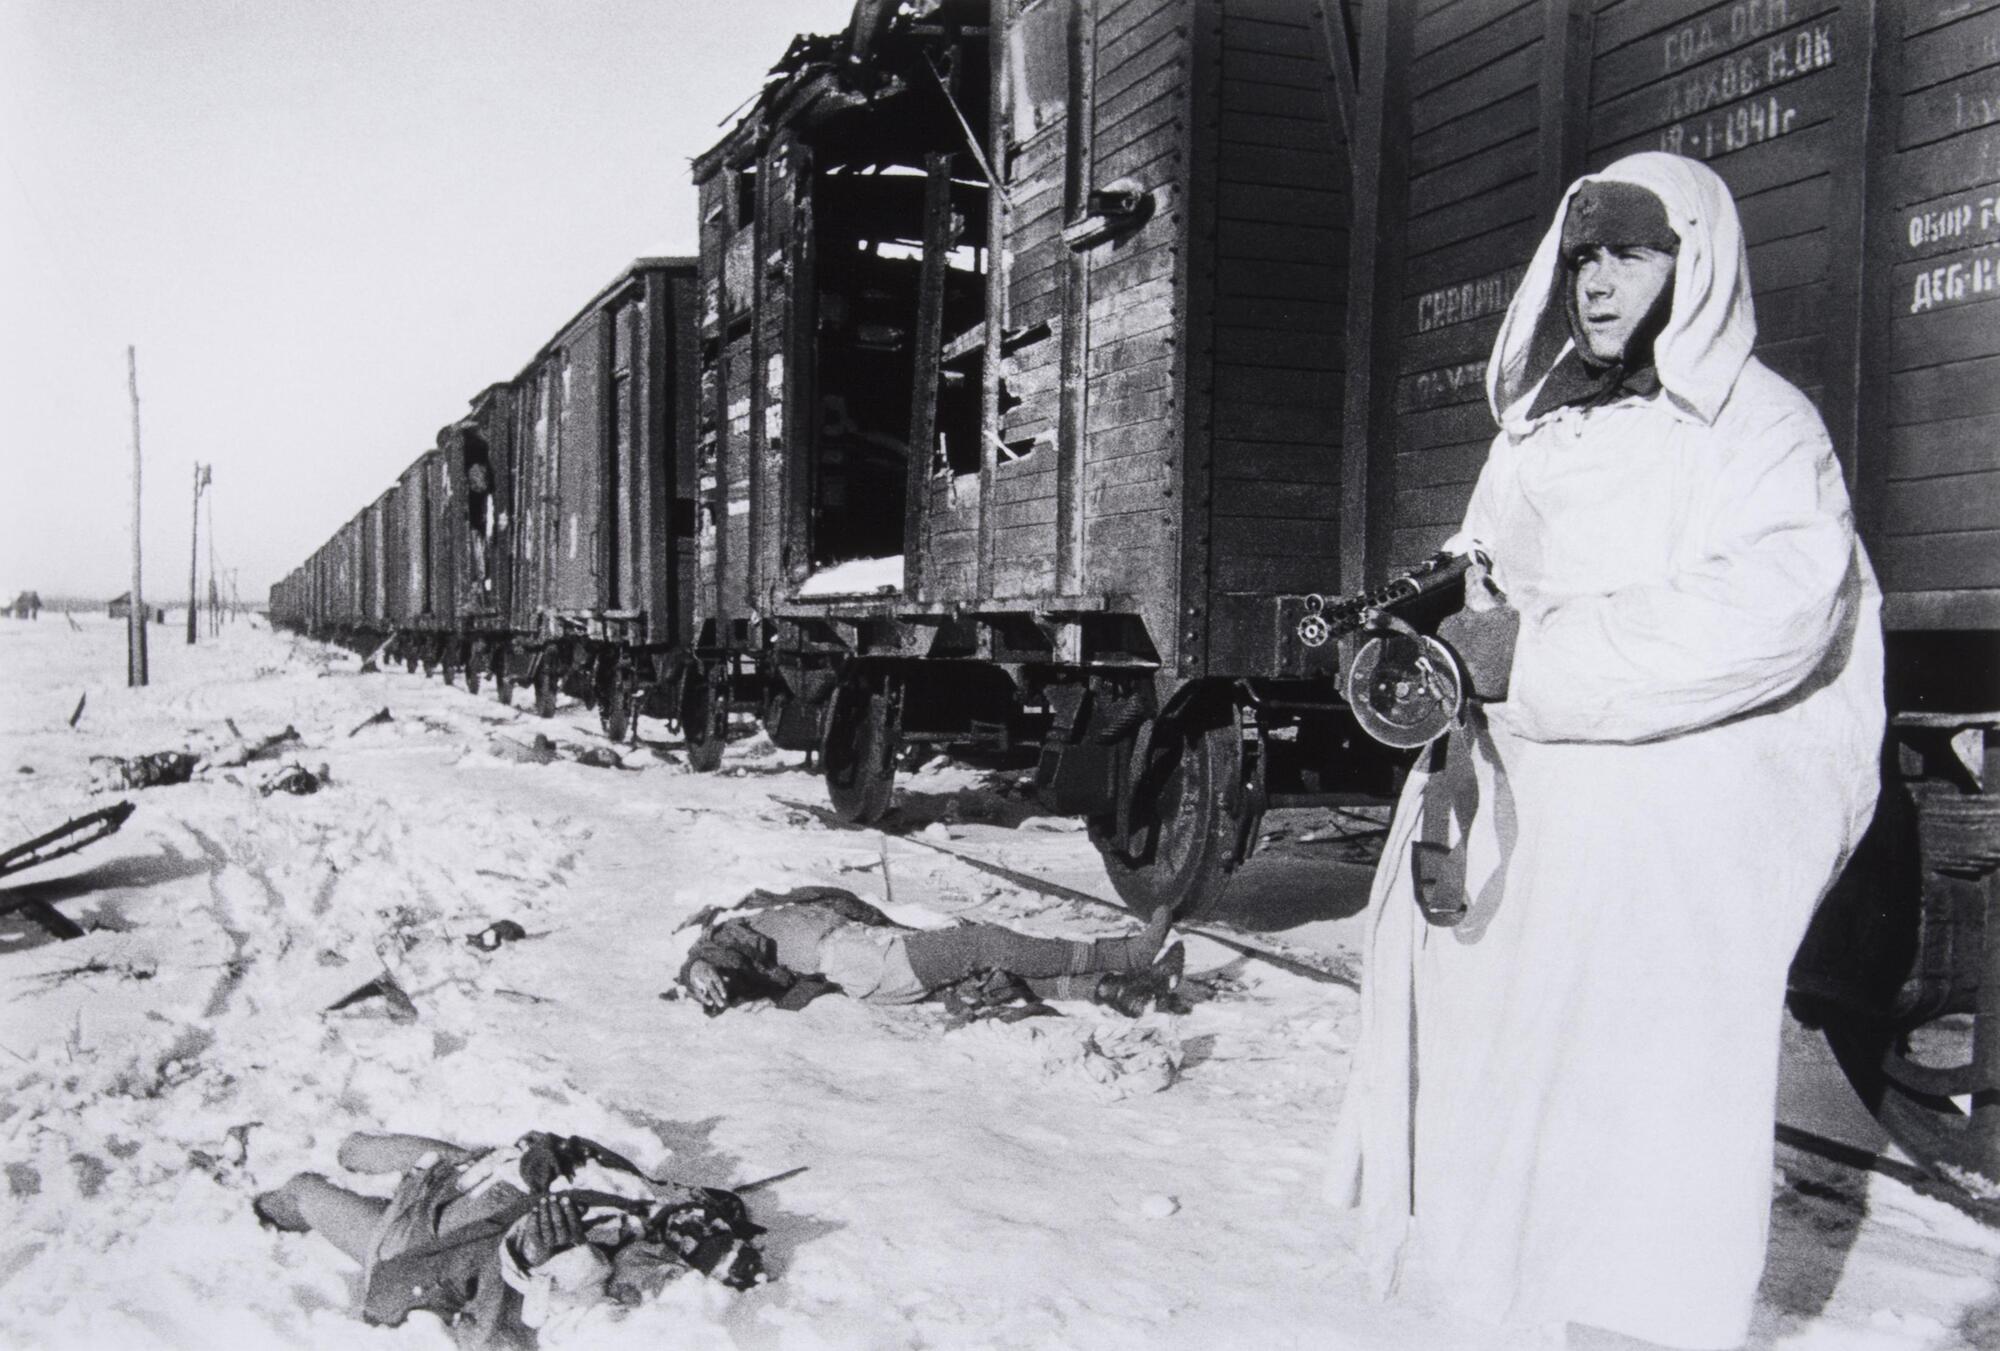 A soldier in winter gear holds a firearm next to an unmoving train while dead soldiers lie in the snow around him.